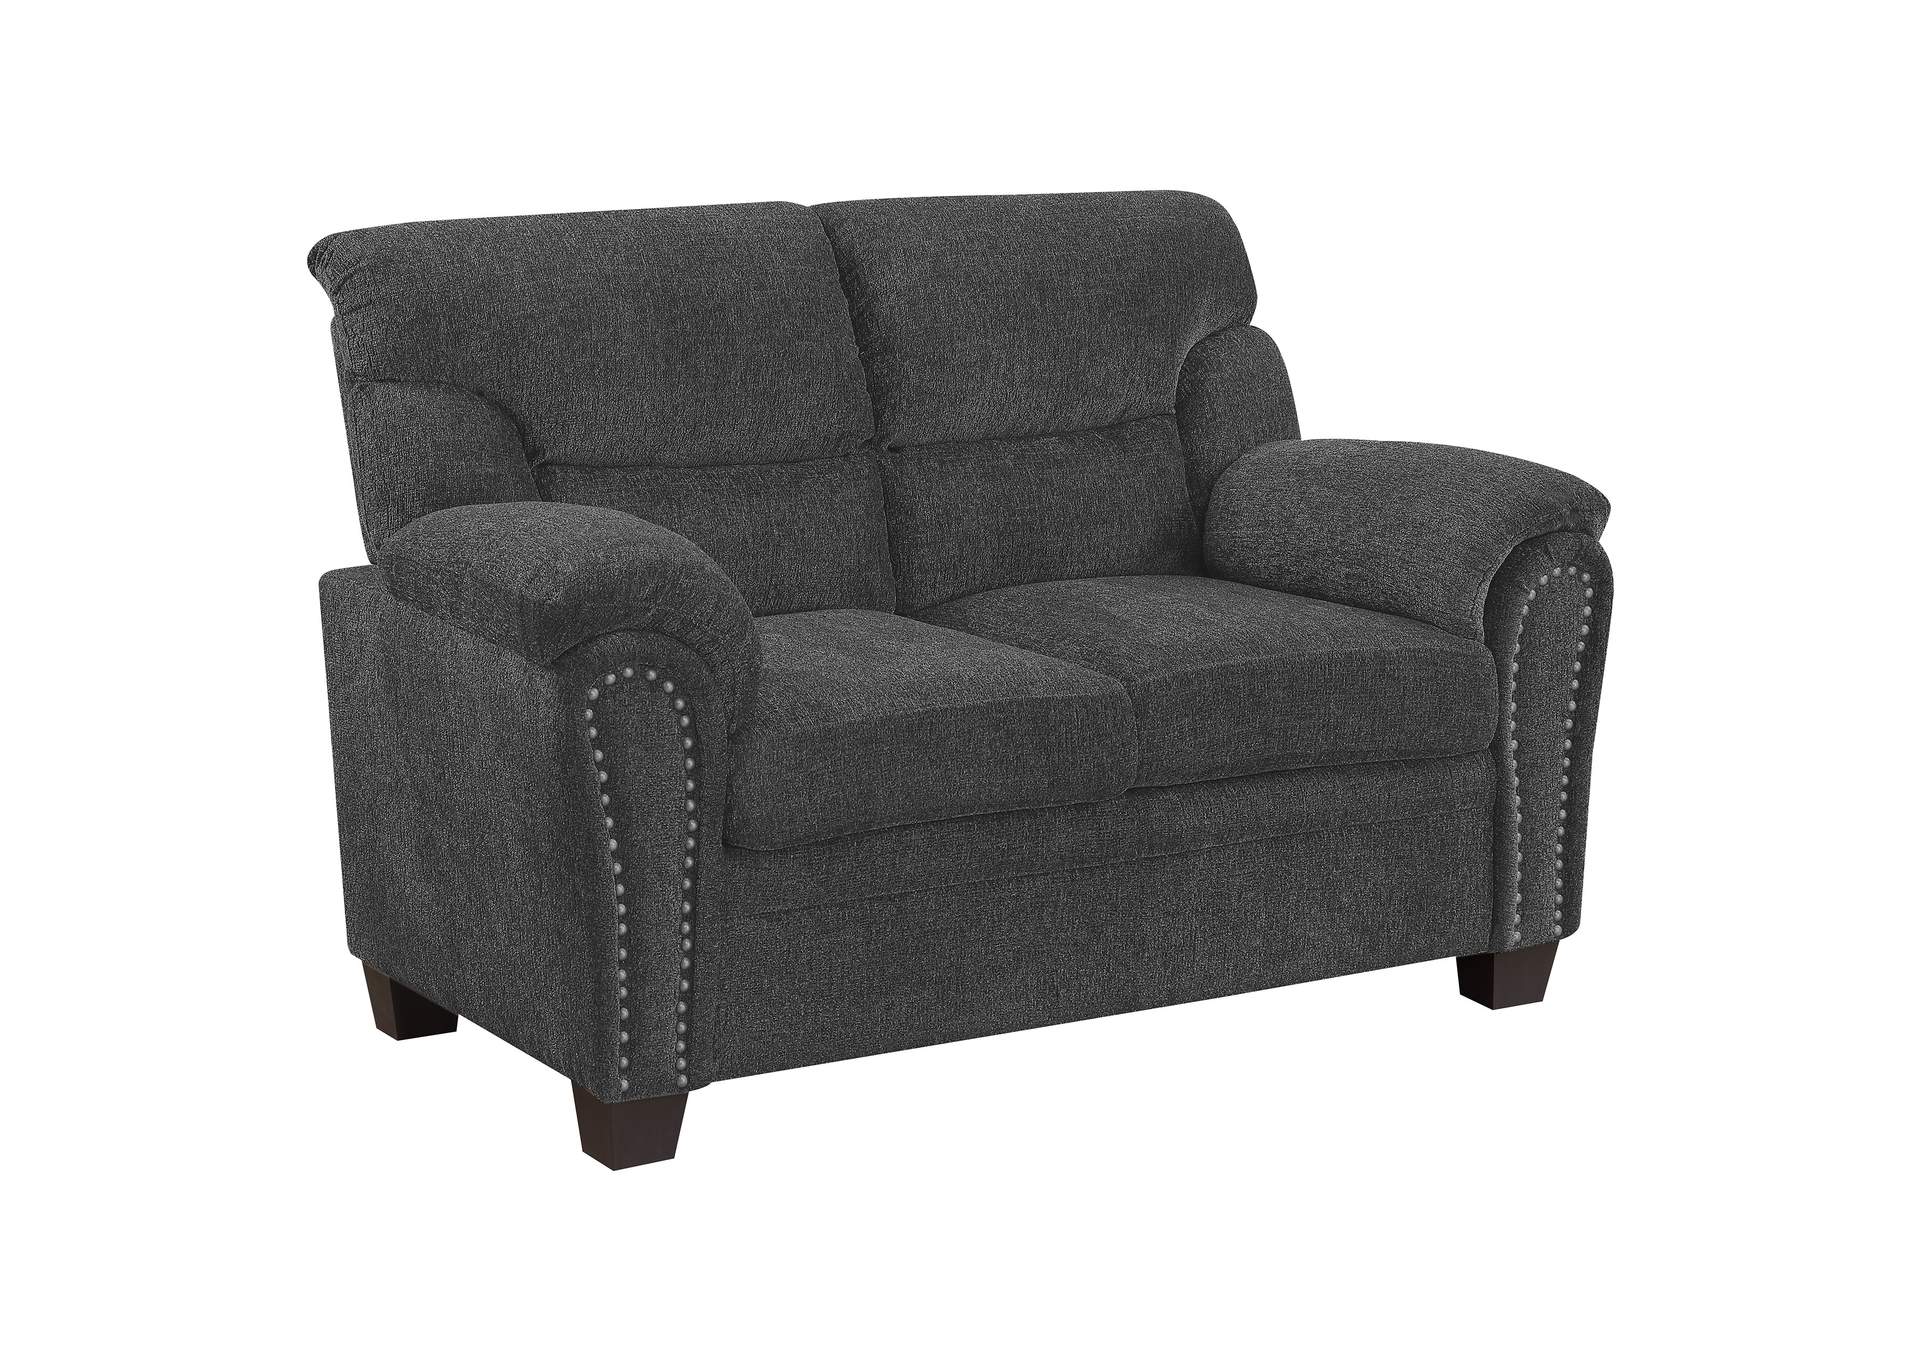 Clementine Upholstered Loveseat with Nailhead Trim Grey,Coaster Furniture